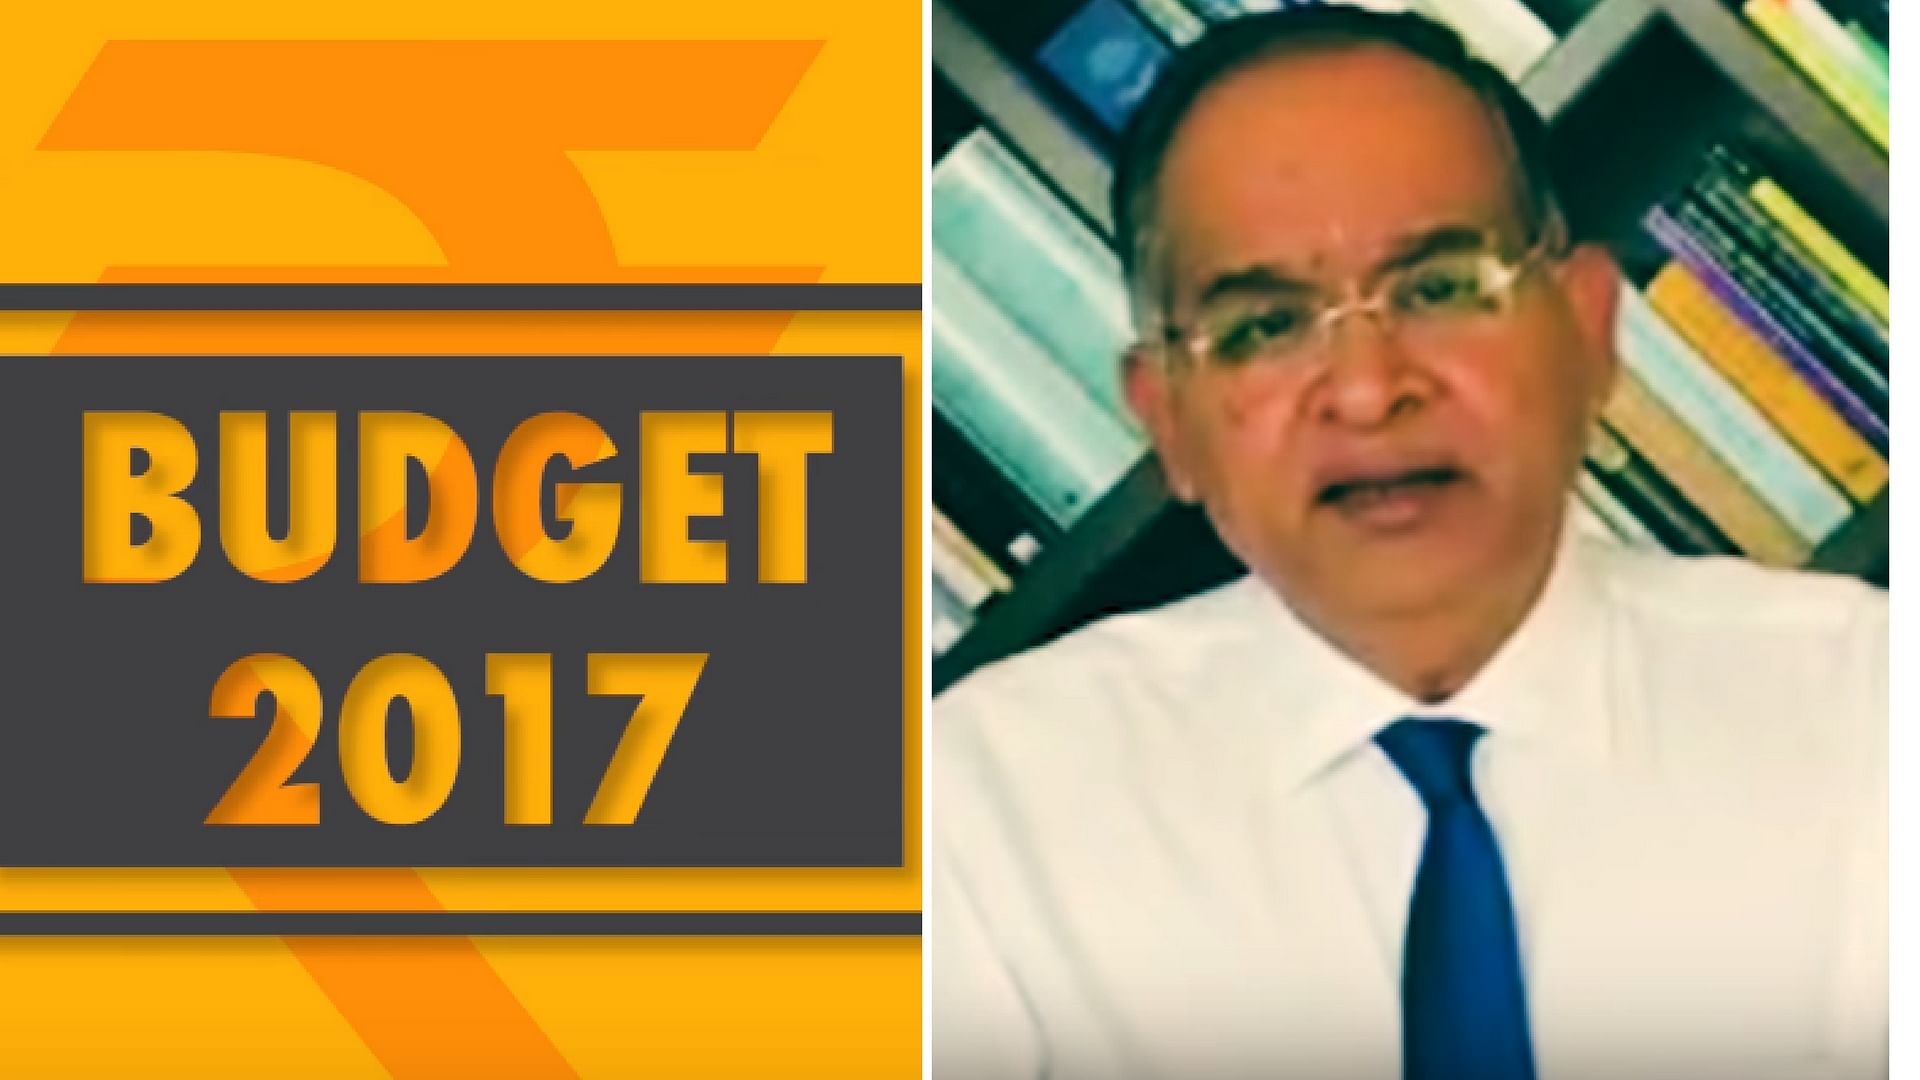  Tax expert TP Ostwal tells The Quint his expectations from Budget 2017. (Photo: The Quint)